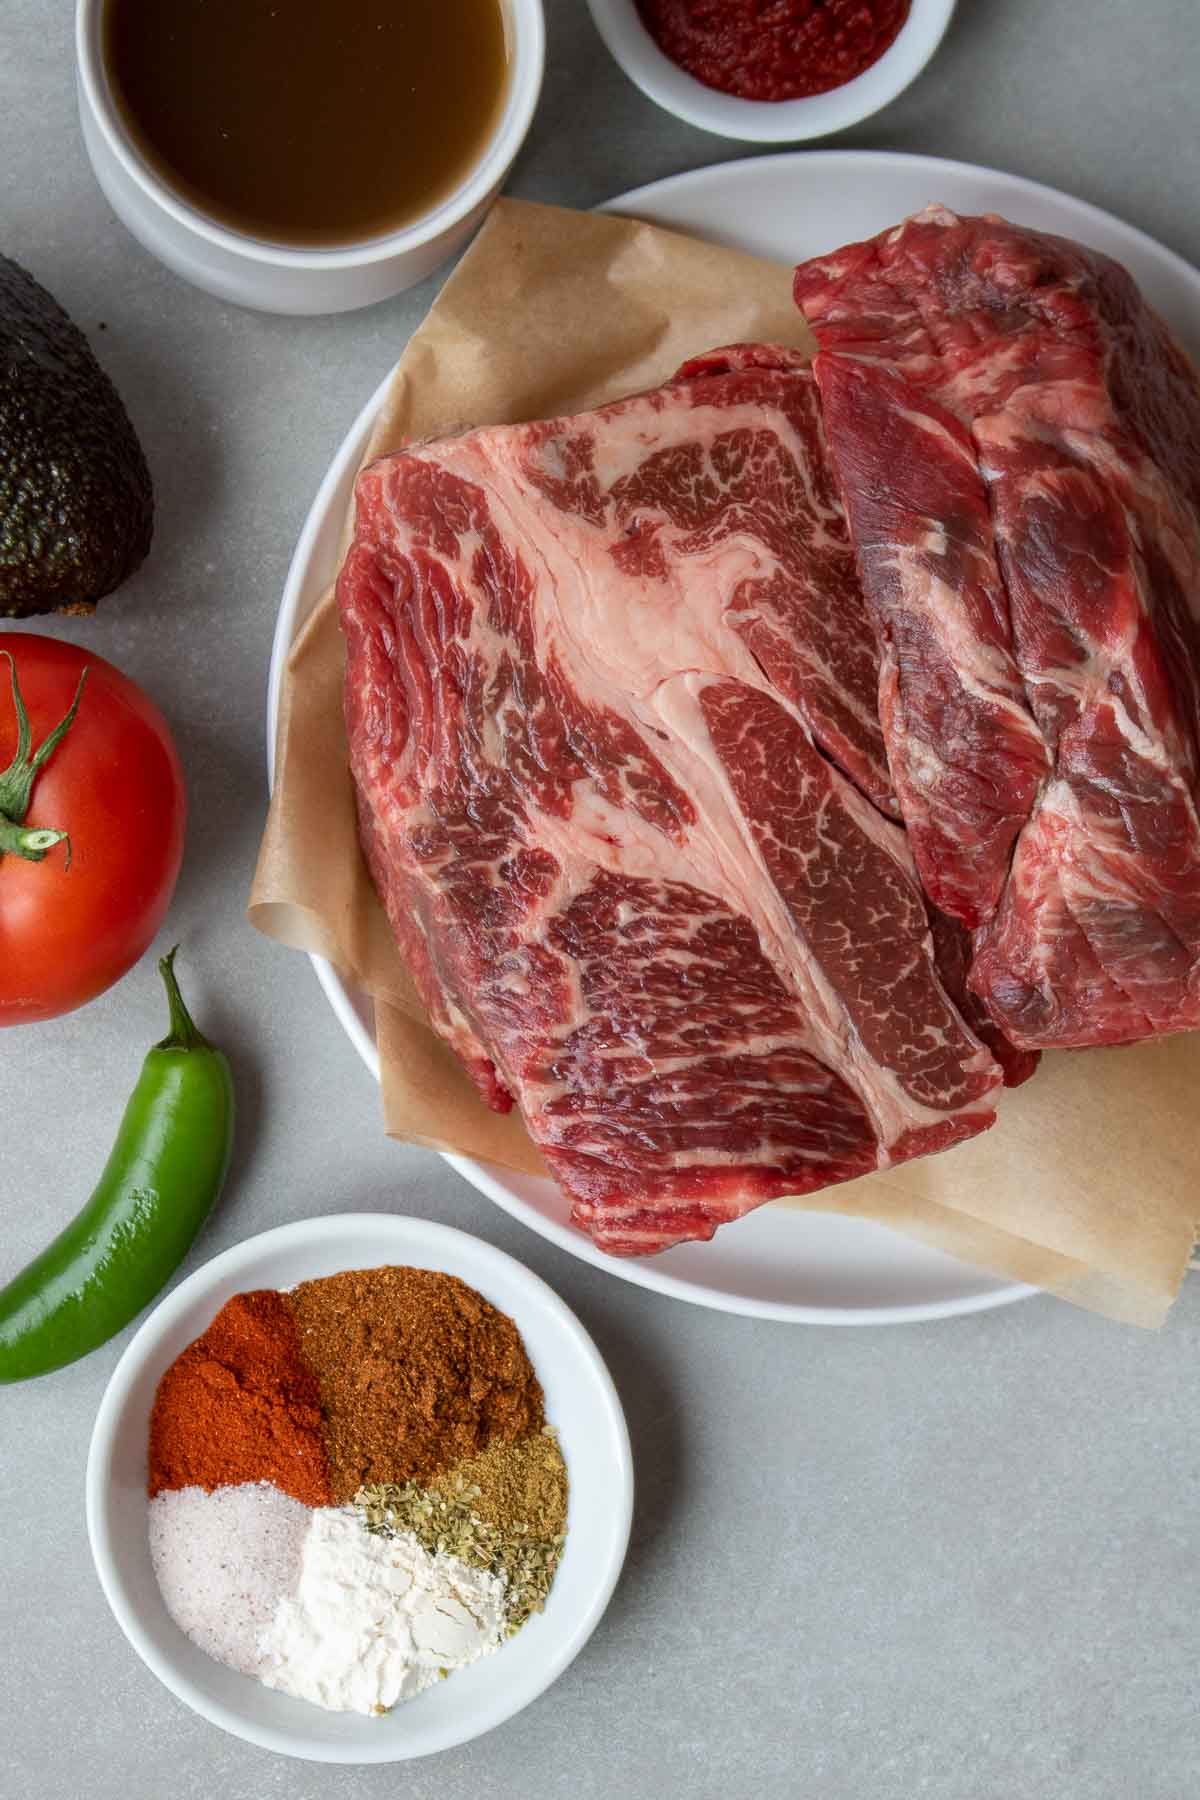 Ingredients to make Mexican shredded beef tacos: beef chuck roast, beef broth, spices, and tomato paste.